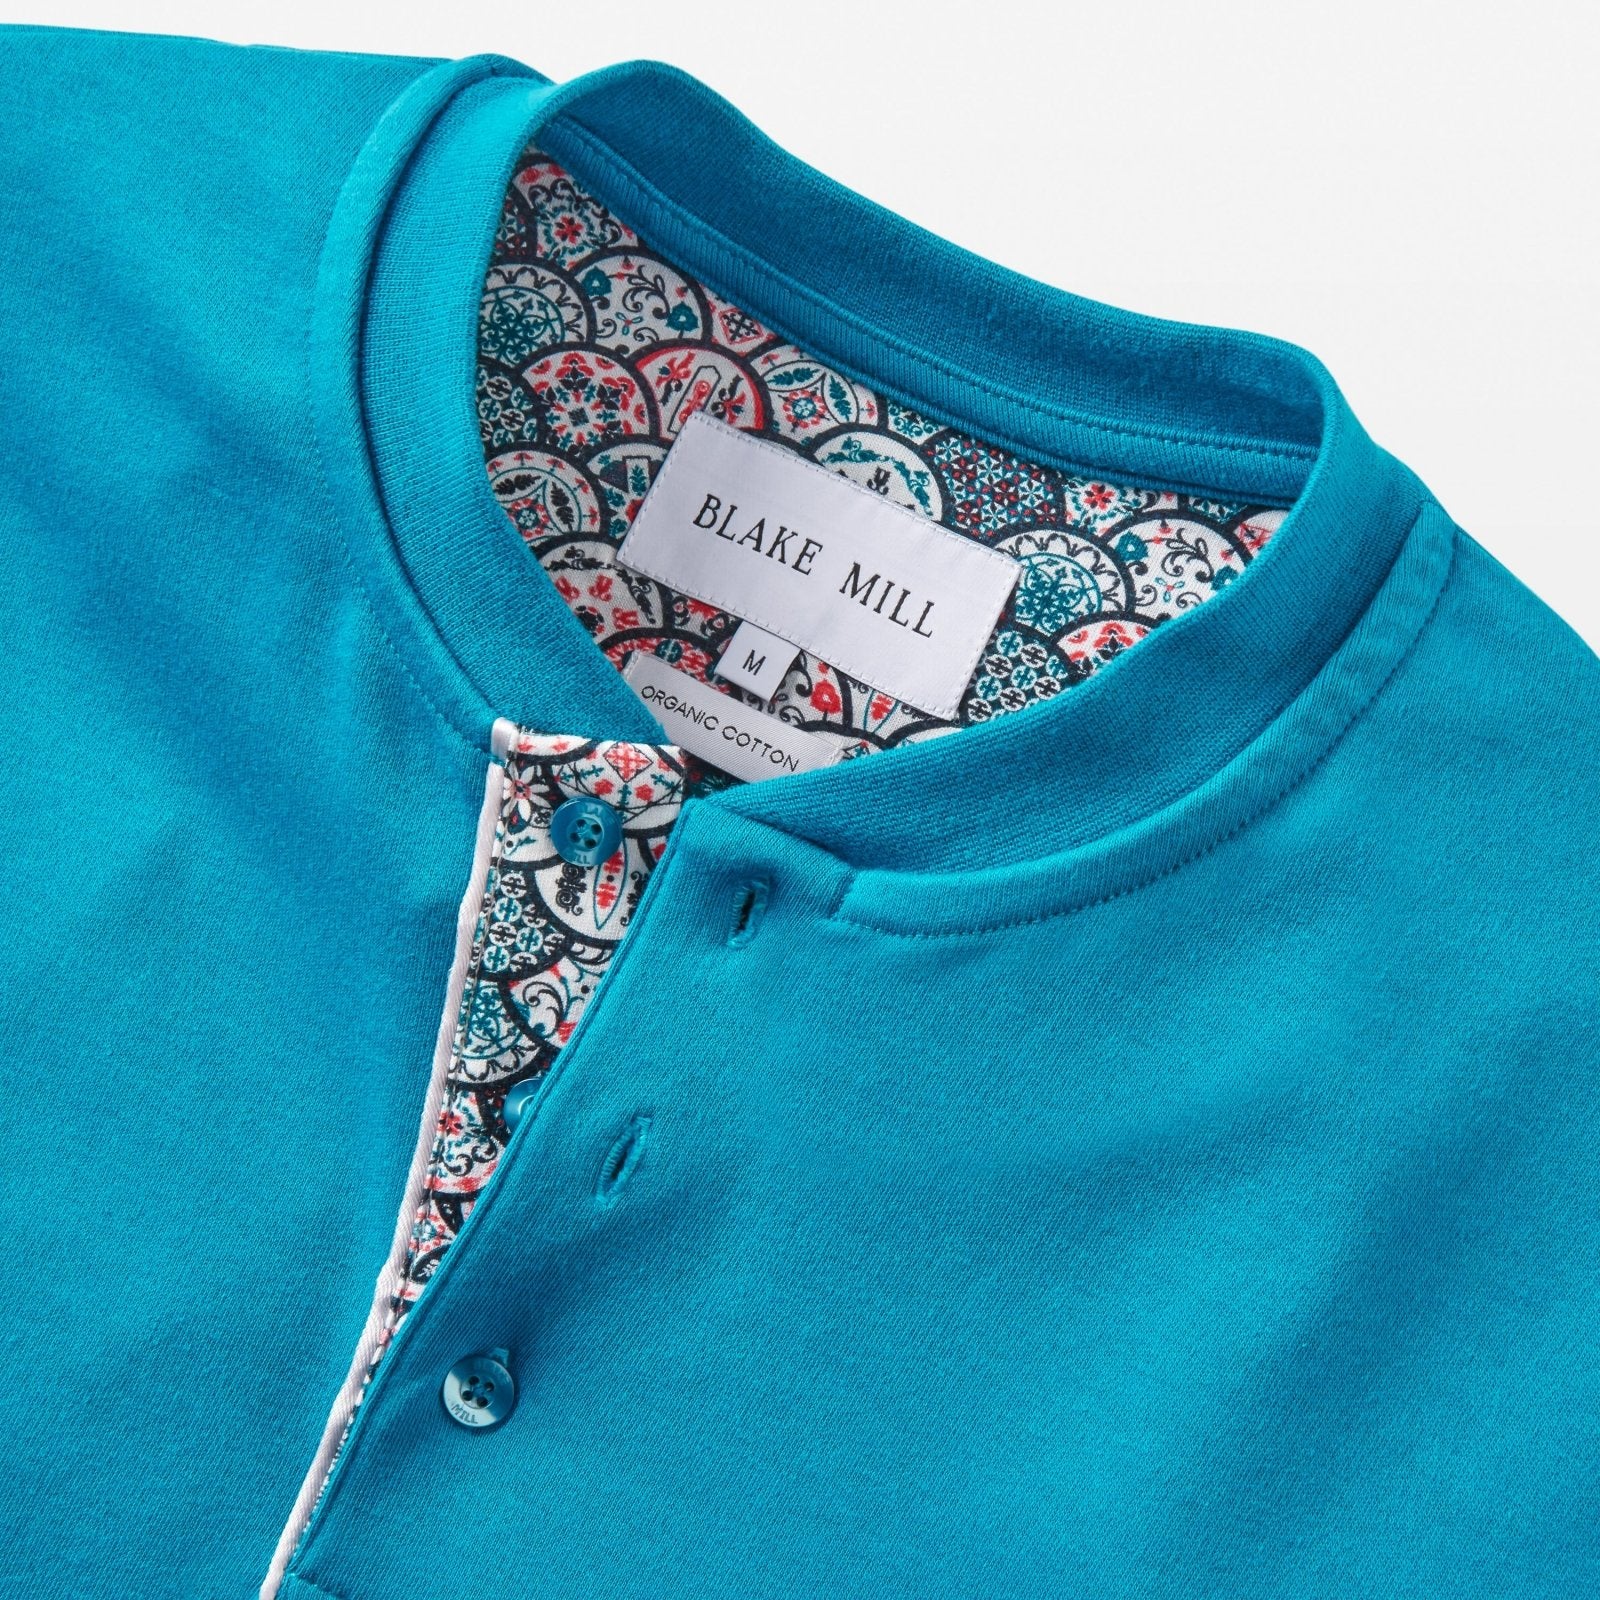 Teal with Geo Lux Jersey - Blake Mill